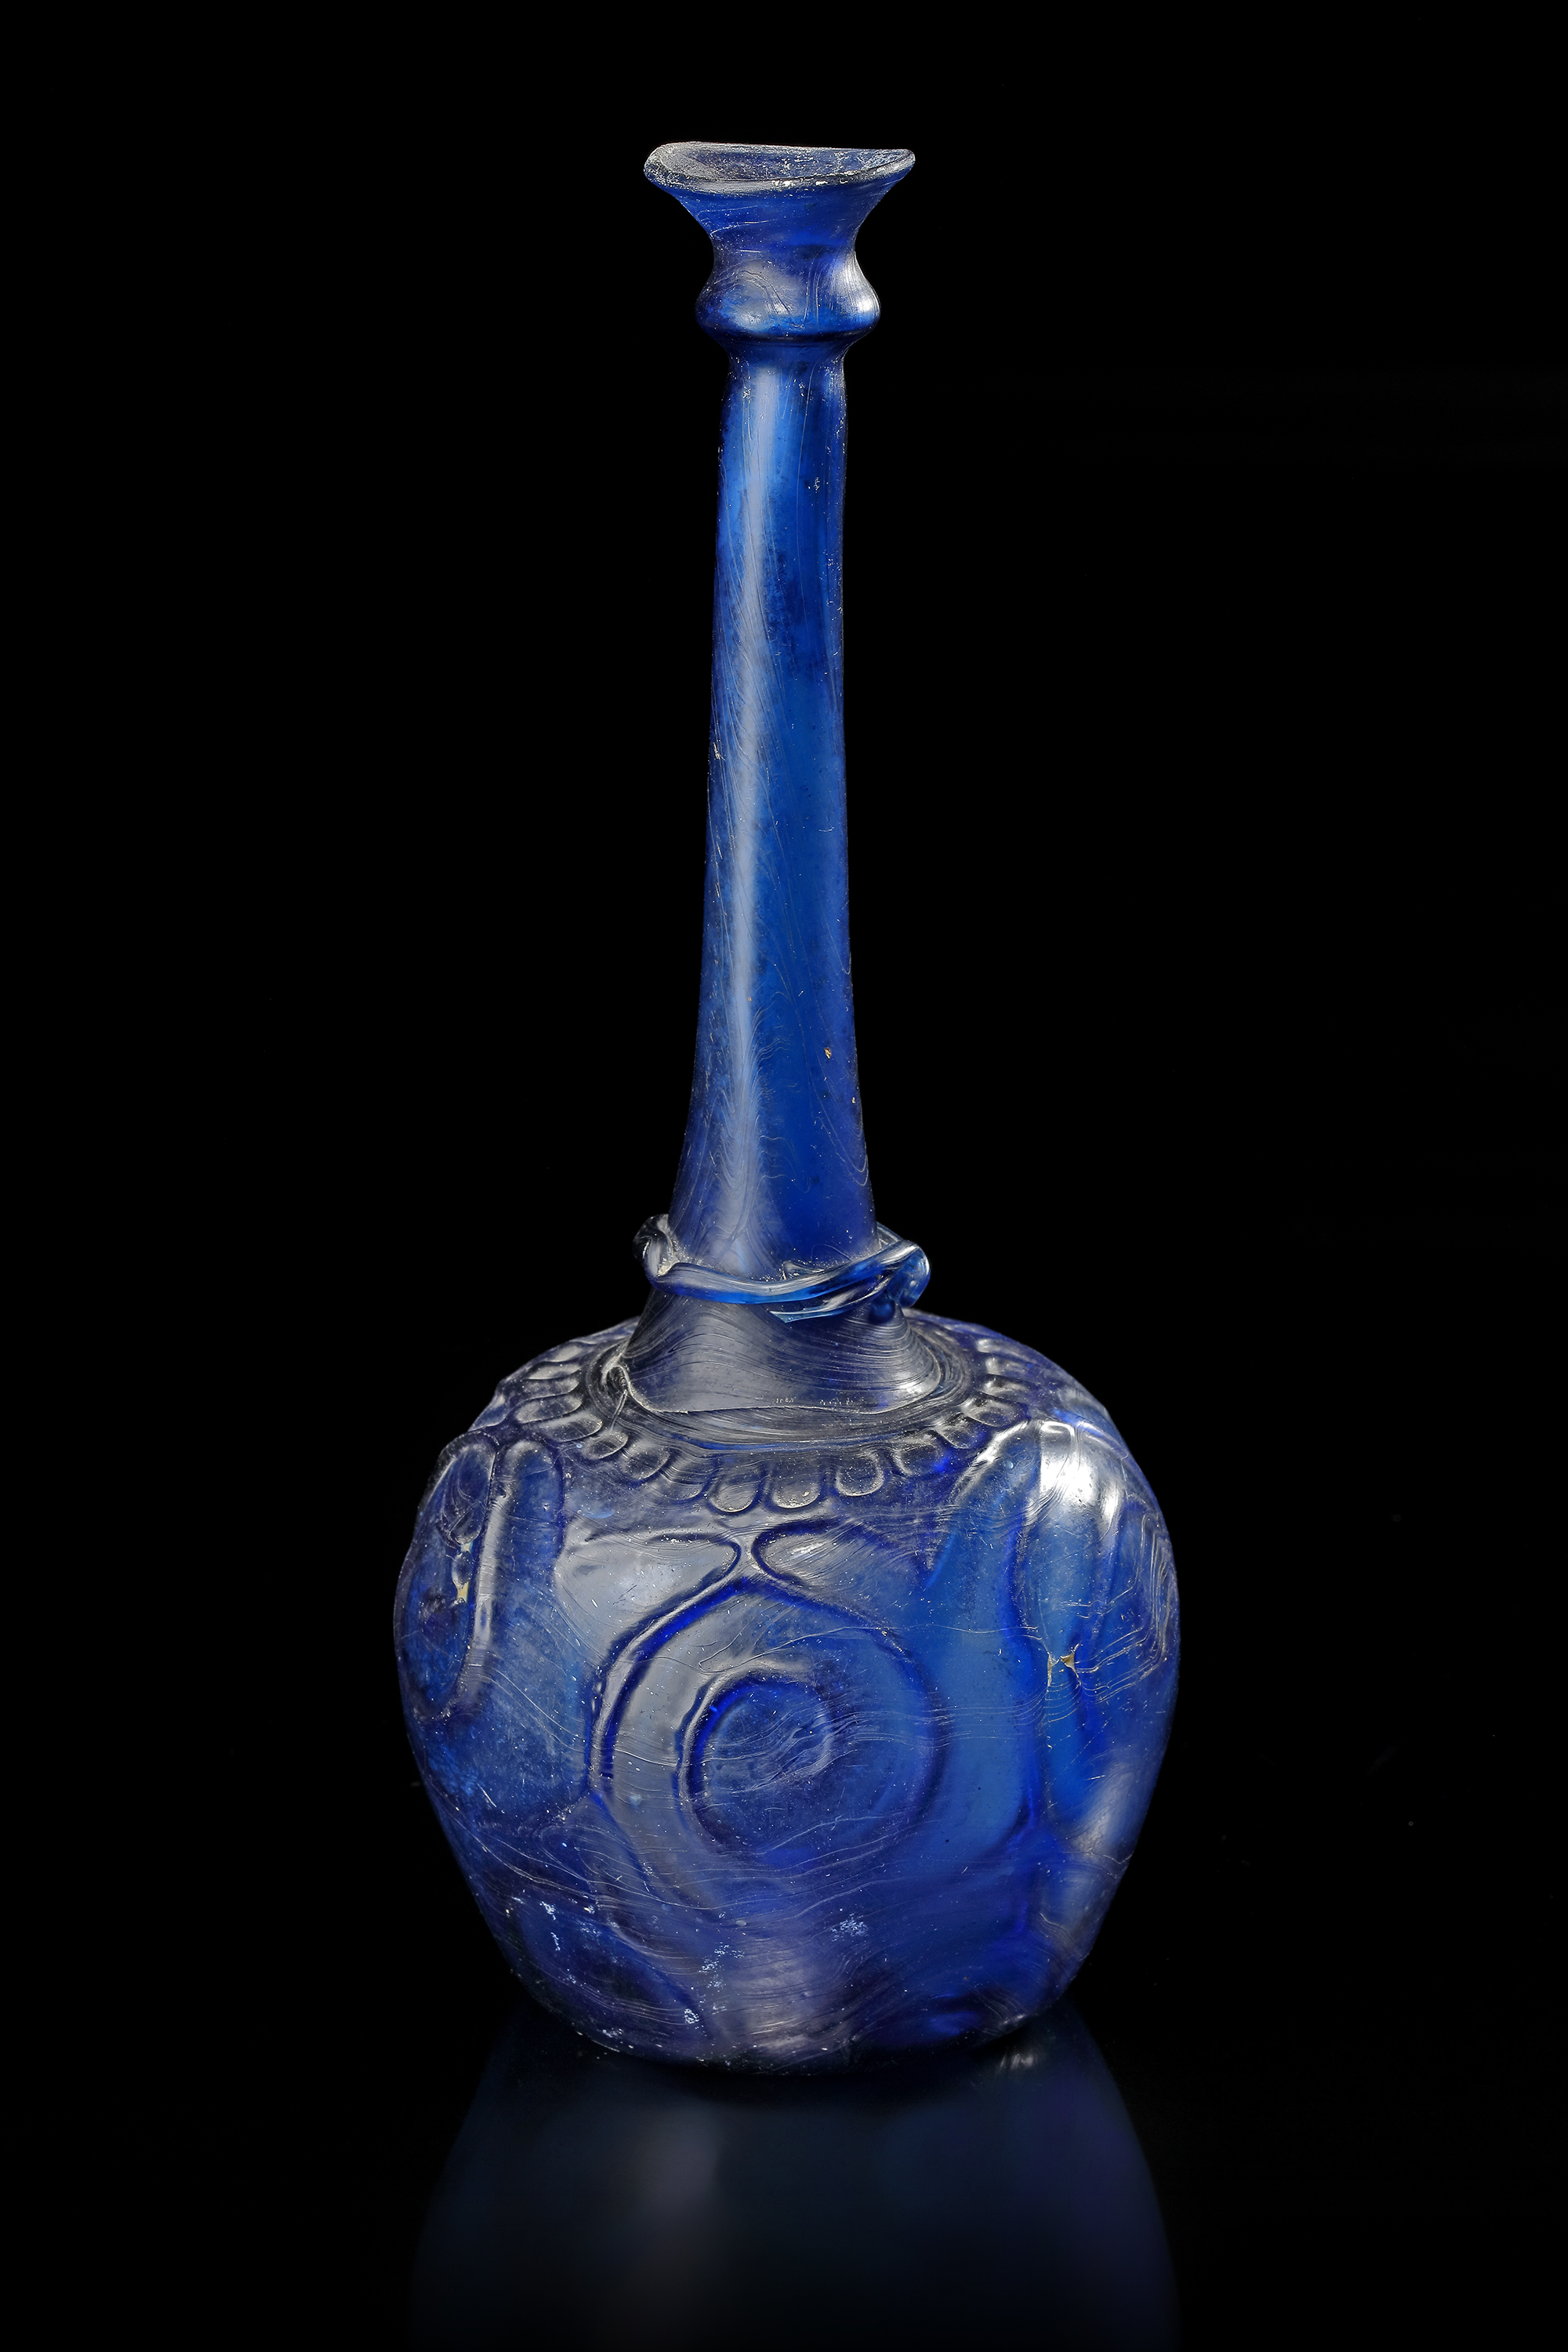 A LARGE MOULD-BLOWN BLUE GLASS BOTTLE-VASE OR SPRINKLER, PERSIA, 12TH CENTURY - Image 13 of 14